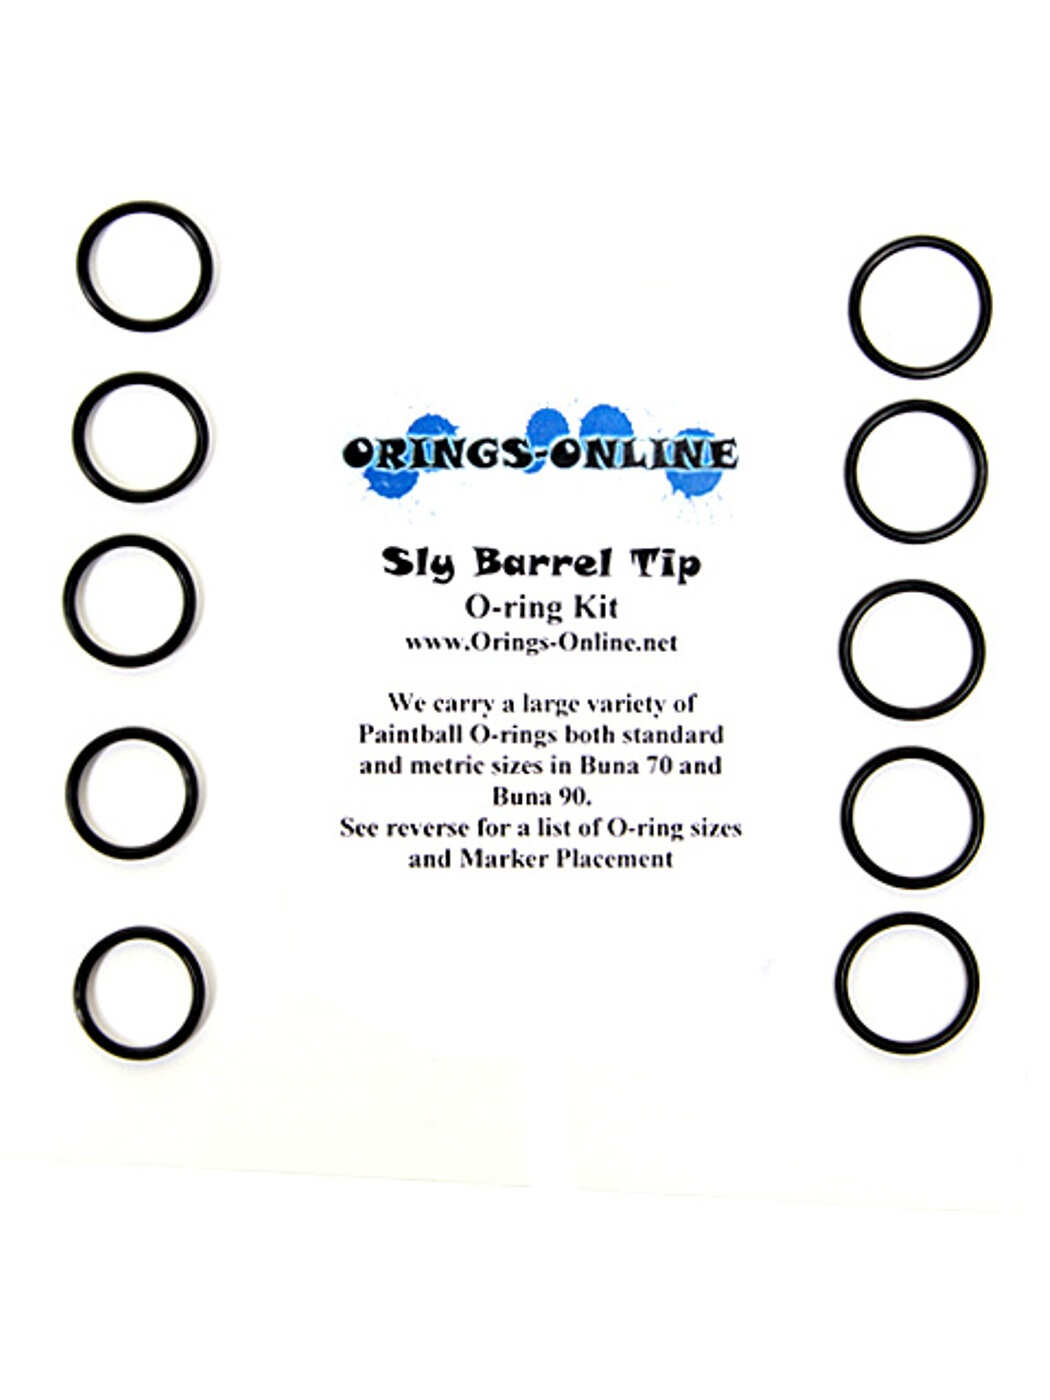 25 pack of Sly Barrel Paintball O-rings